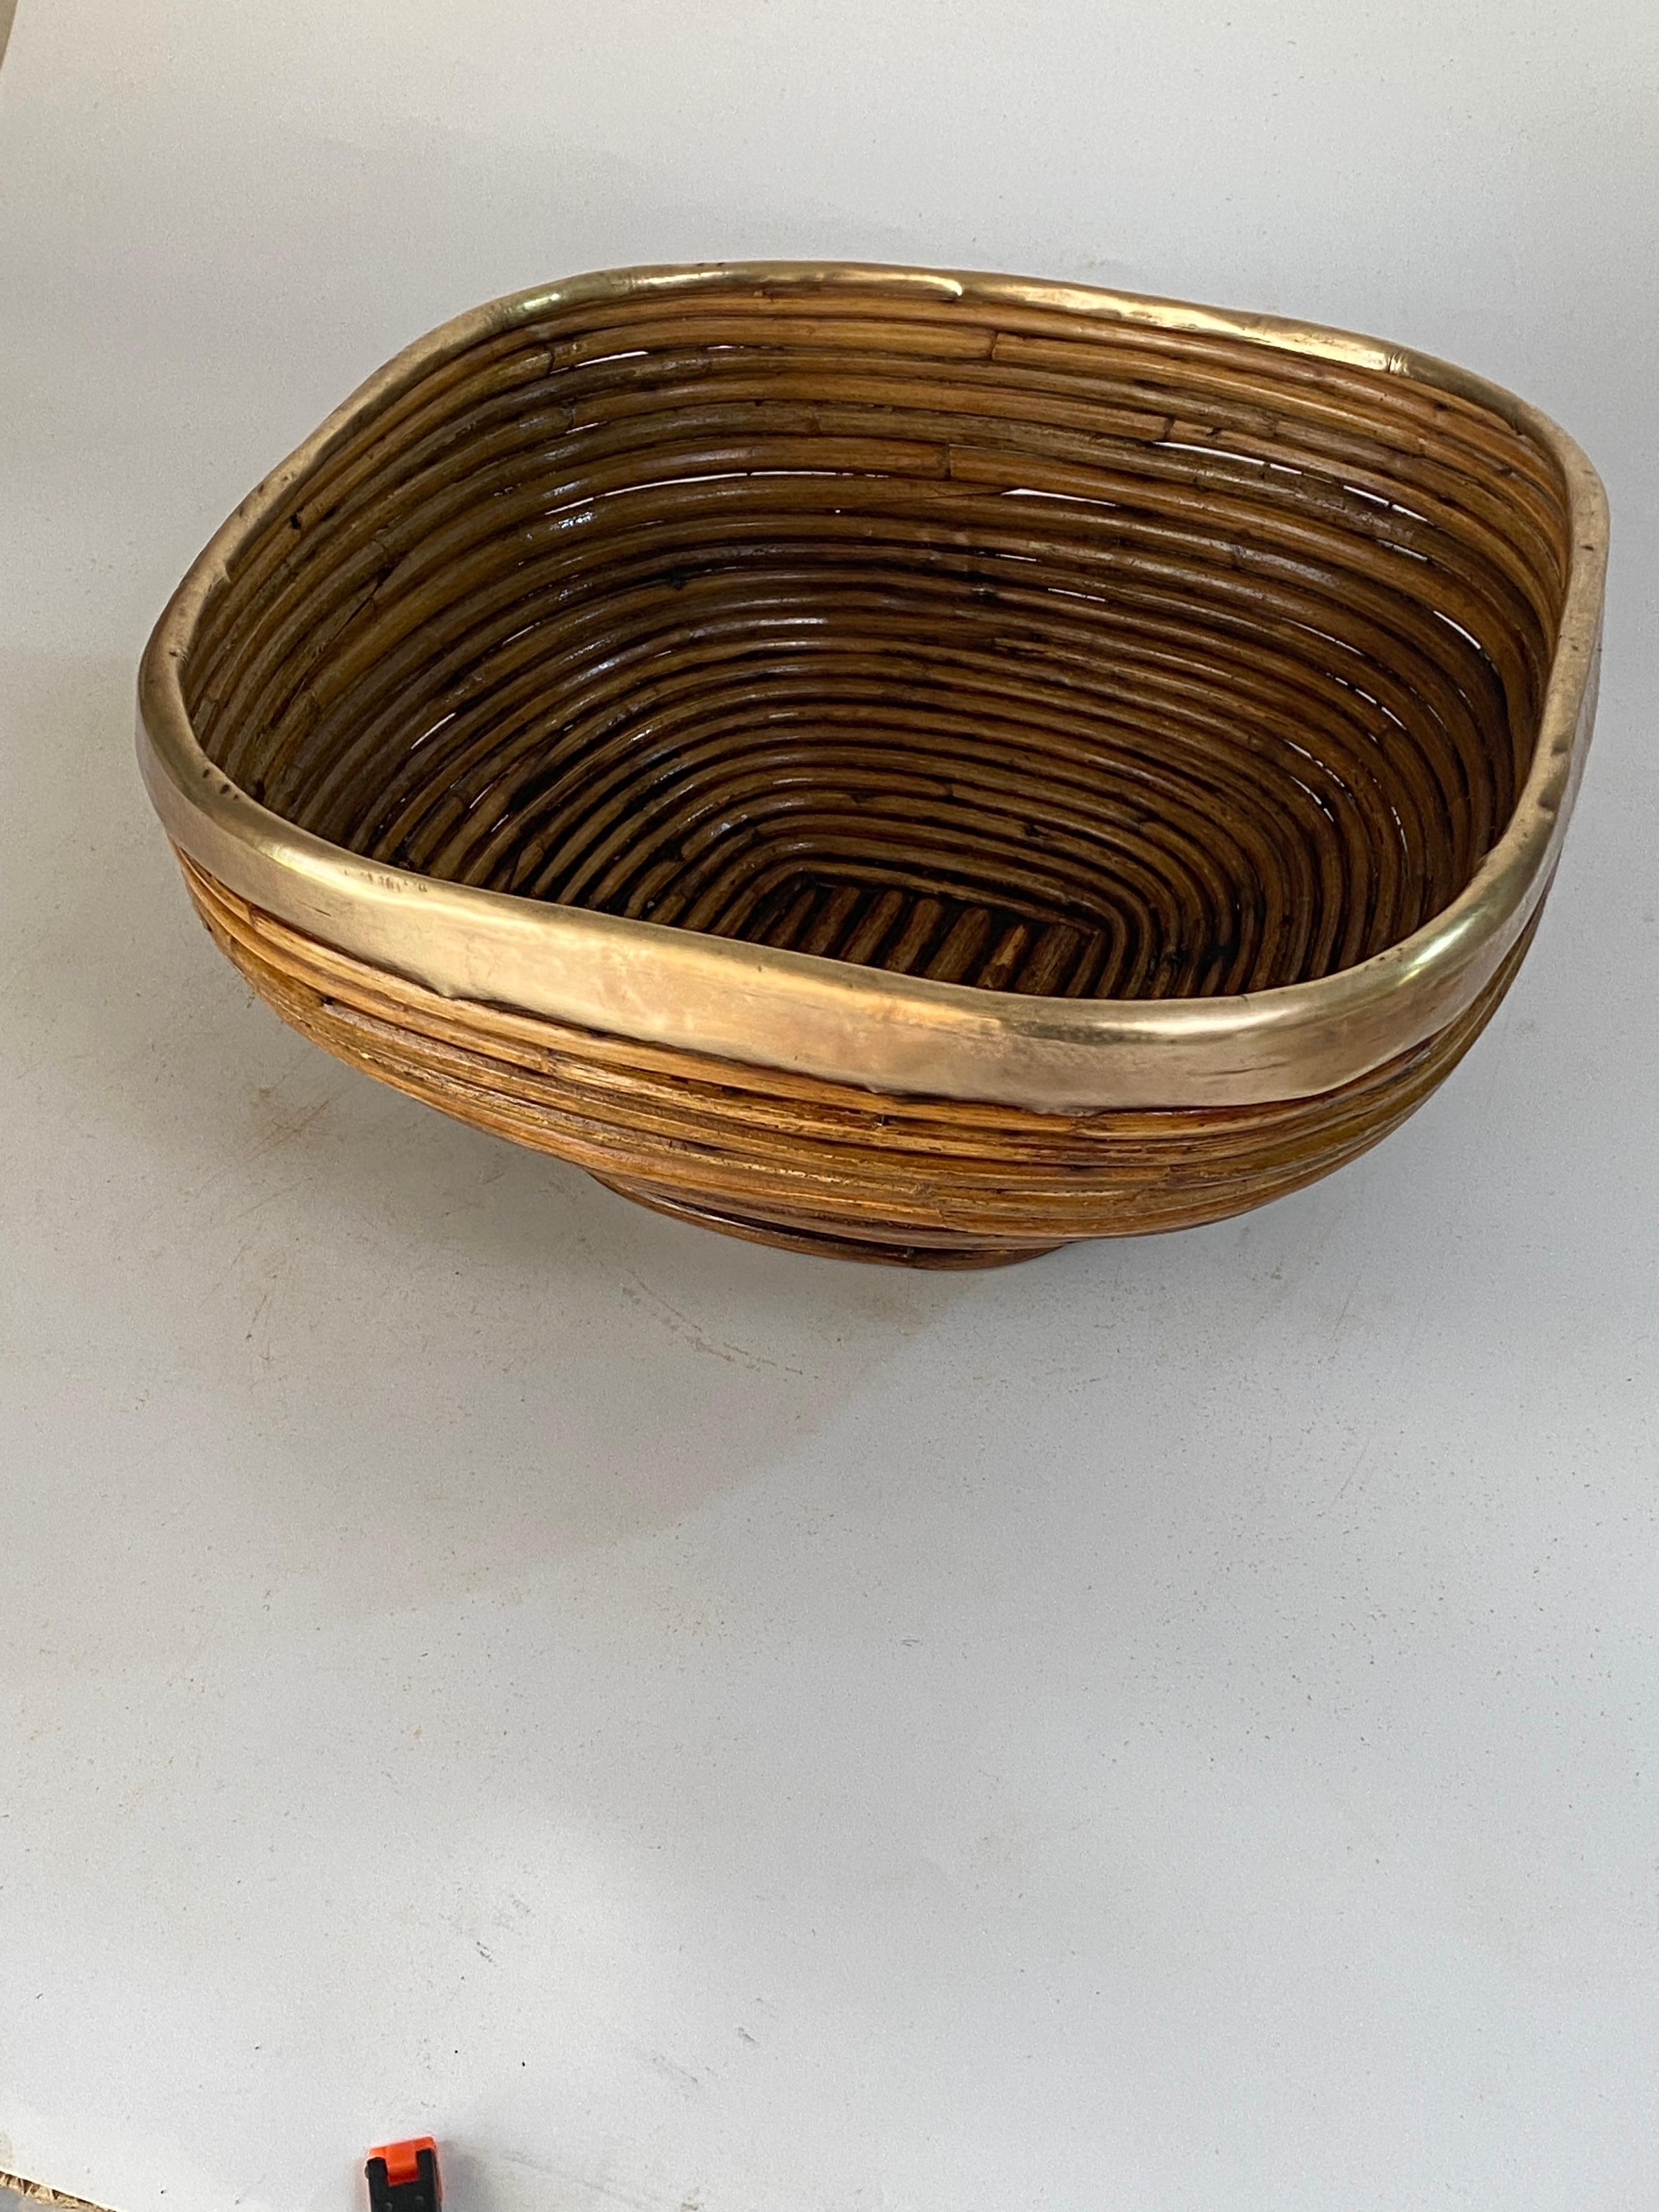 Rattan and Brass Italian Large Basket Bowl Centerpiece, 1970s Crespi Style For Sale 3